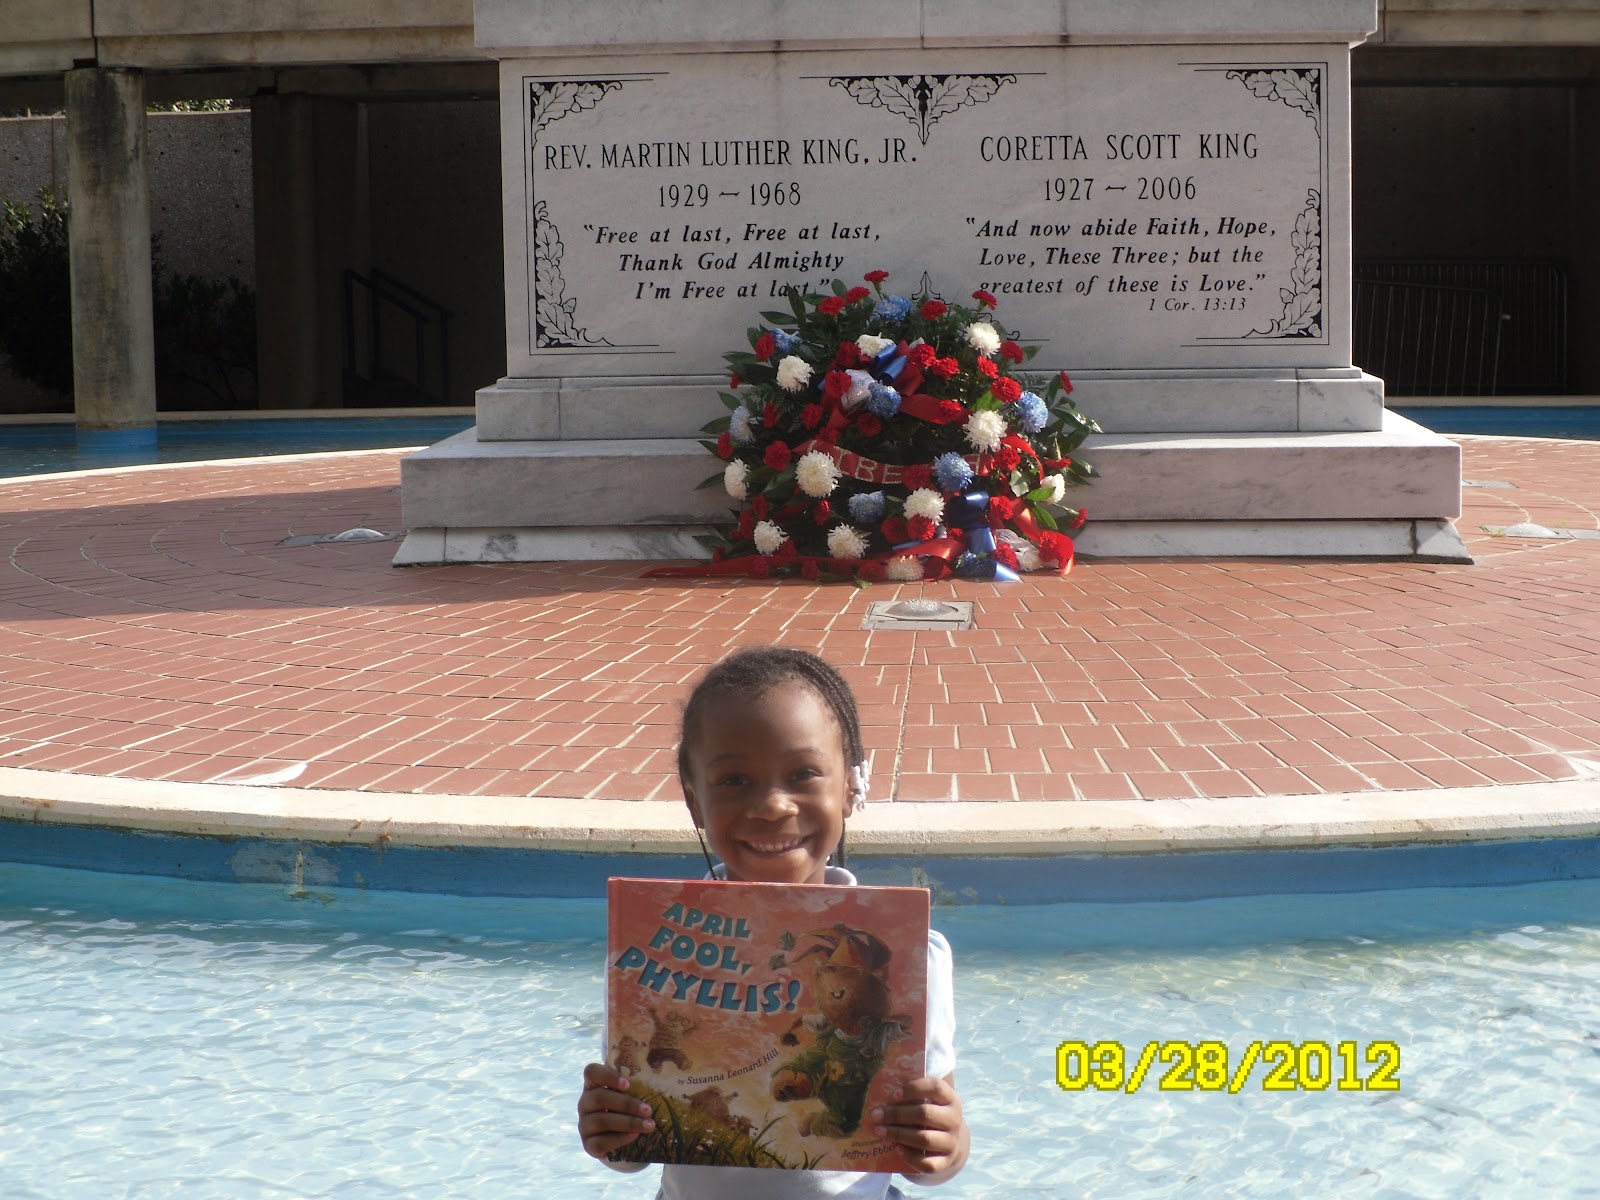 MyLMNOP reads to kids: Phyllis Does it Again! This Time in Georgia!1600 x 1200